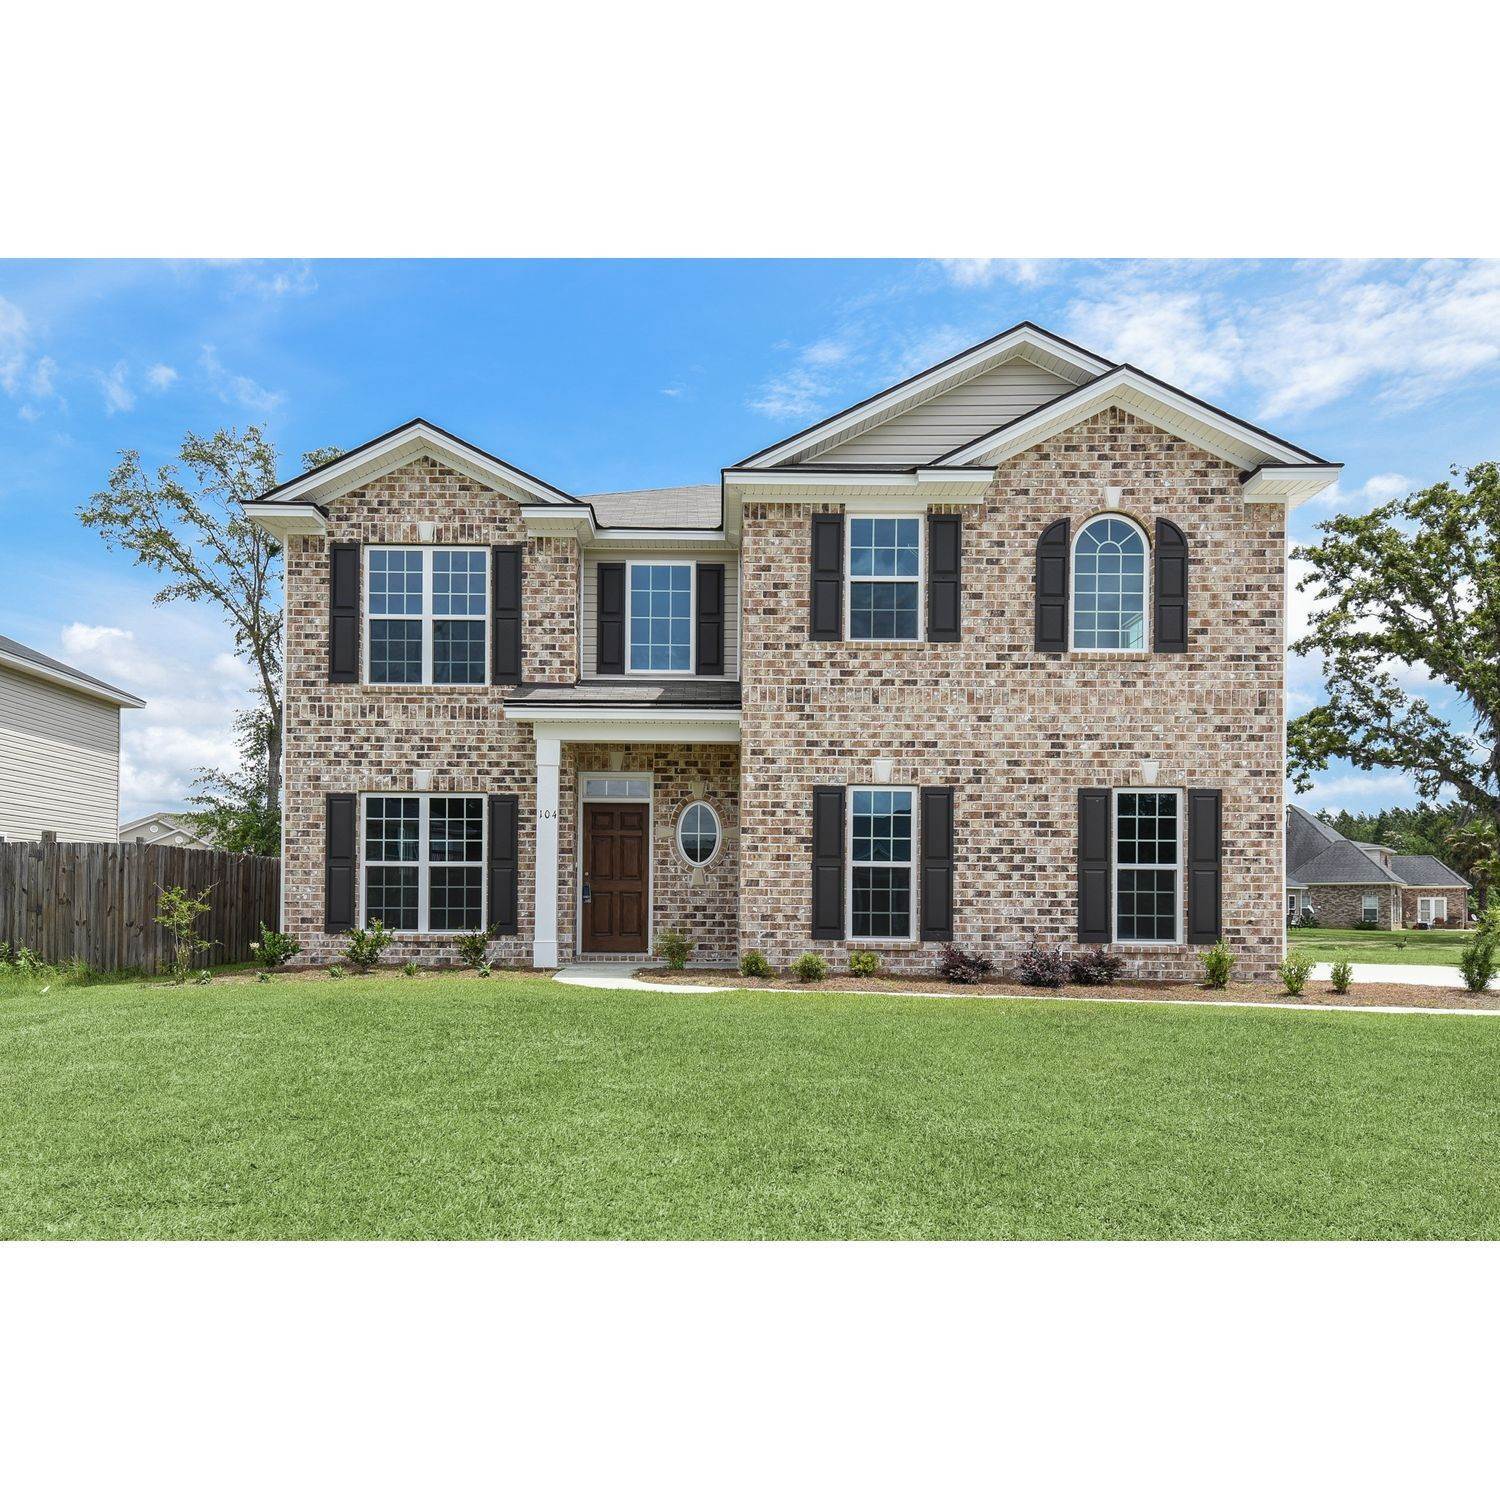 Single Family for Sale at New Haven At Belmont Glen Hodgeville Road, Guyton, GA 31312